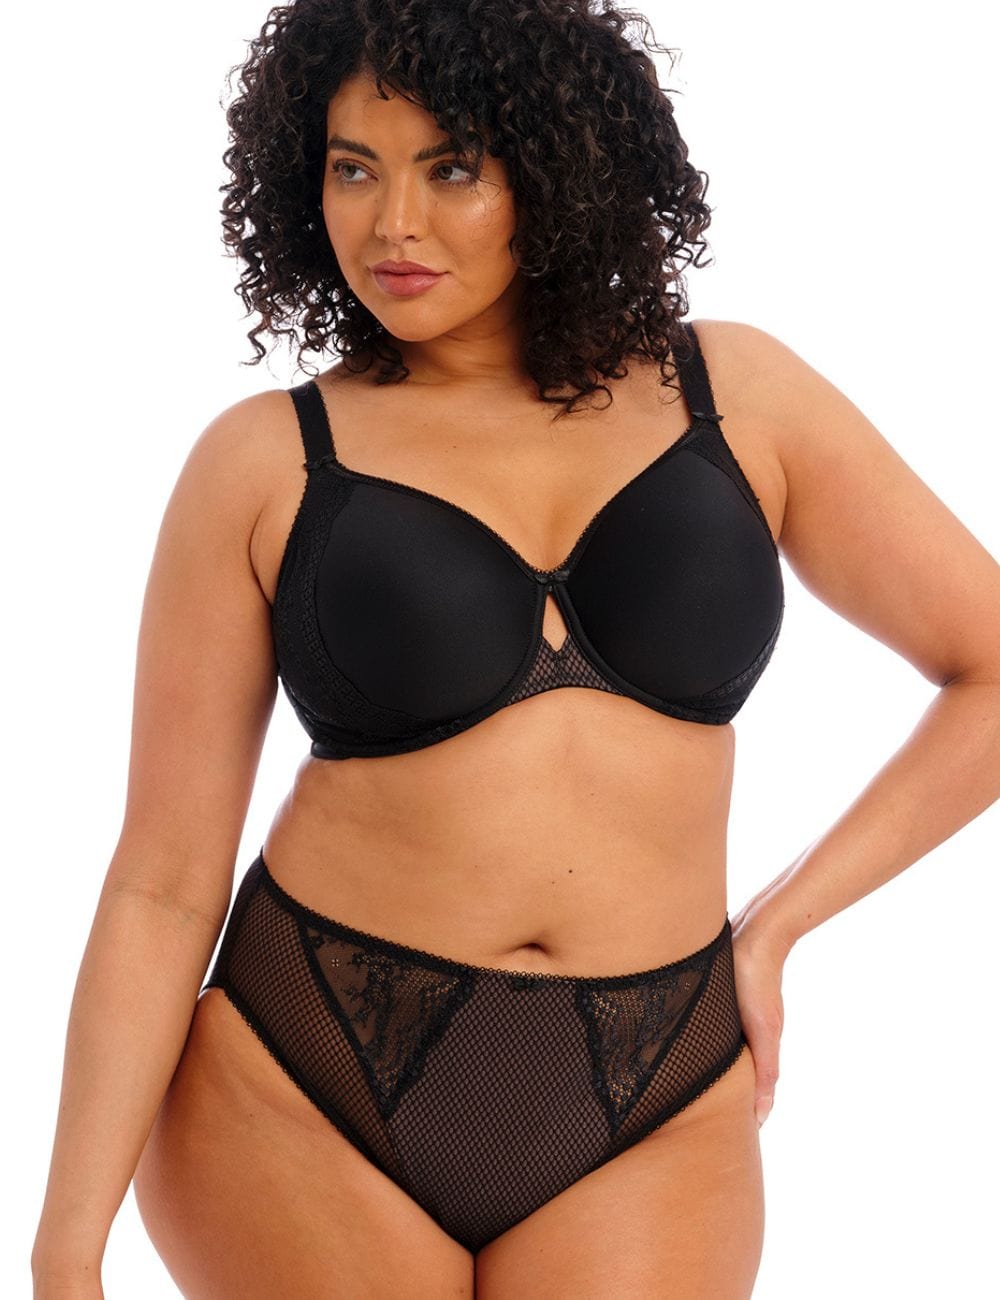 The Bra Patch - Elomi's Charley in Tahiti is now available. This